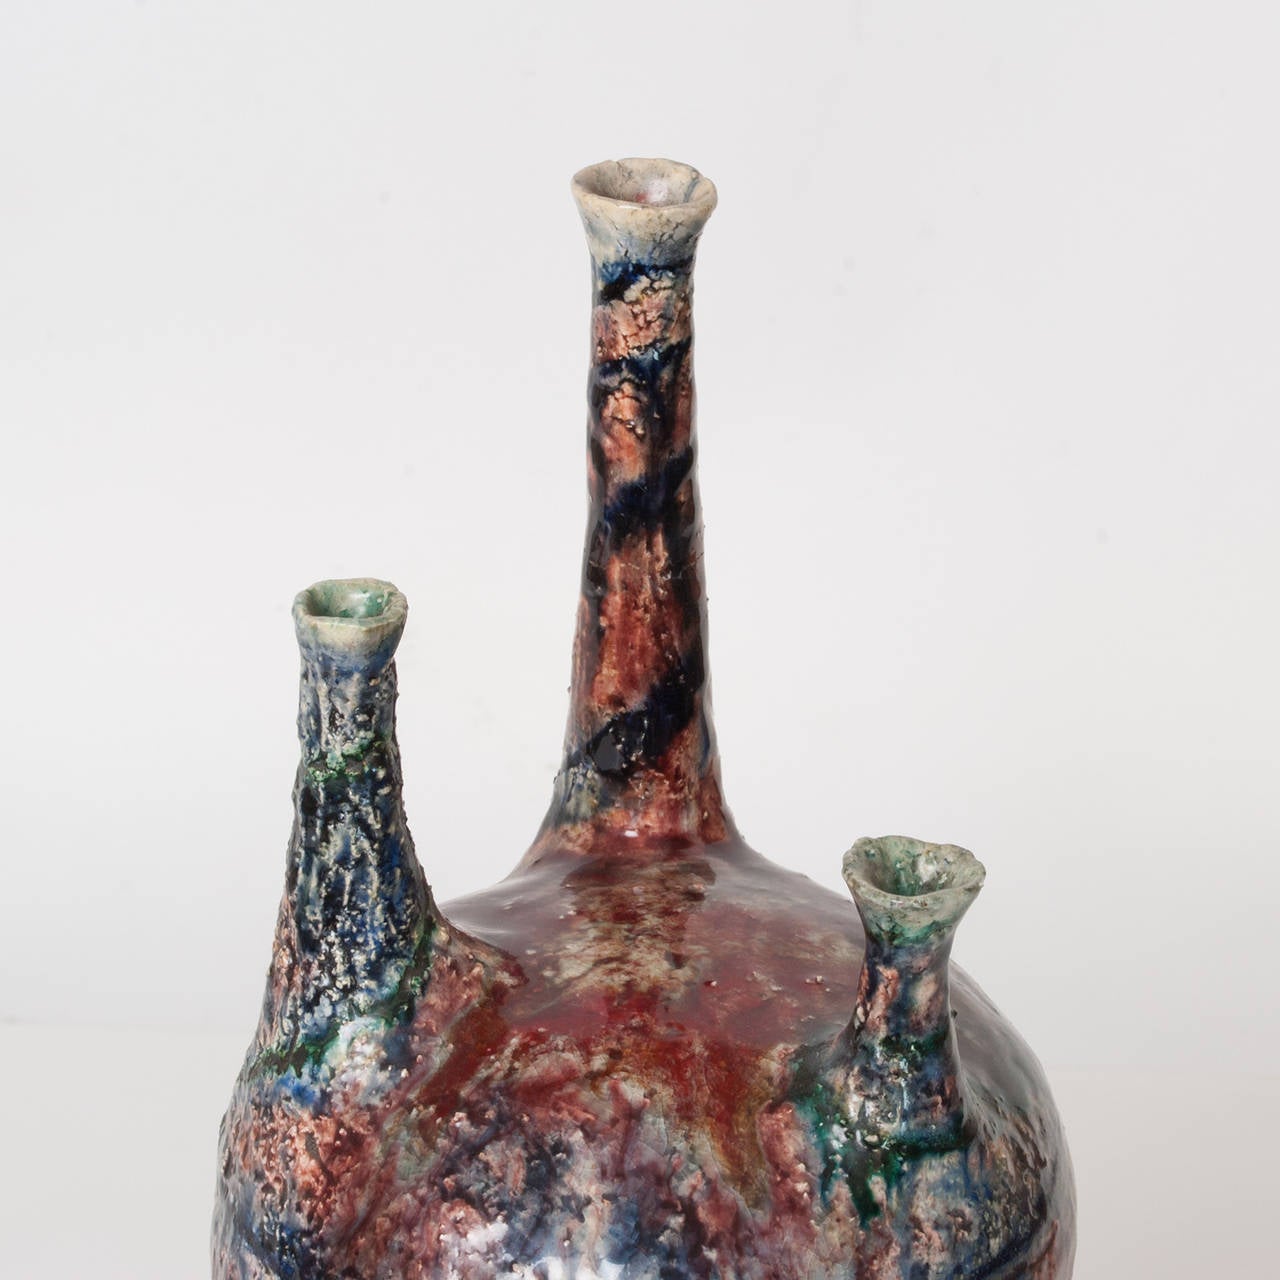 Richly decorated glazed mid-century studio vase from Italy, circa 1950's. Vase are signed Scaruni. Height:13.75